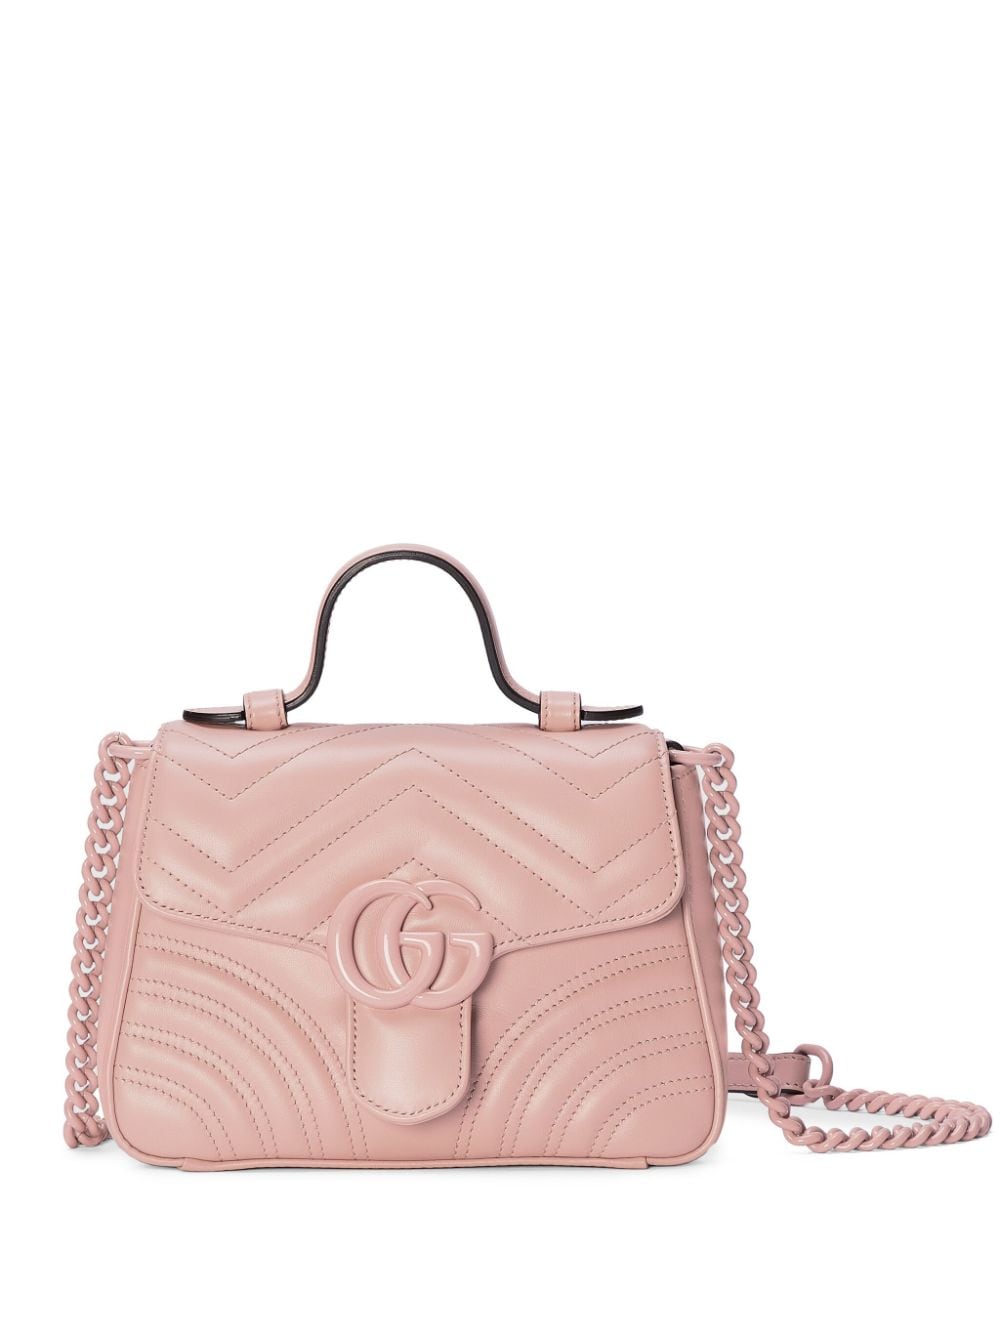 Gucci Gg Marmont Mini Bag In Pink